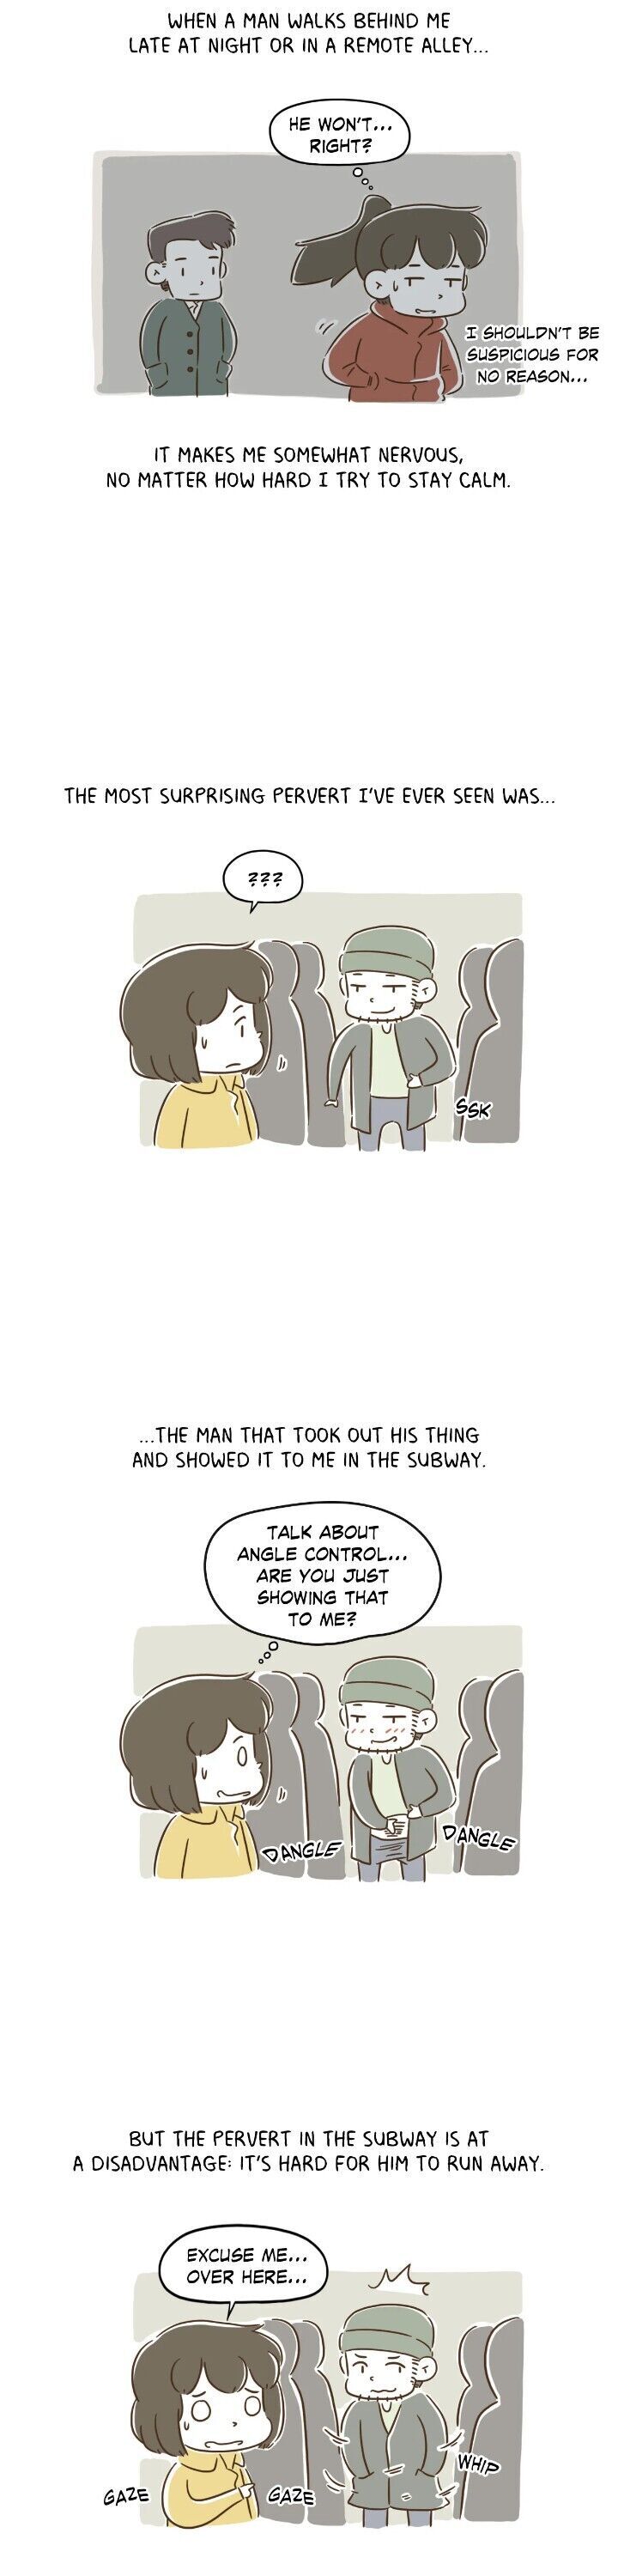 How Far Have You Gone? - Page 2